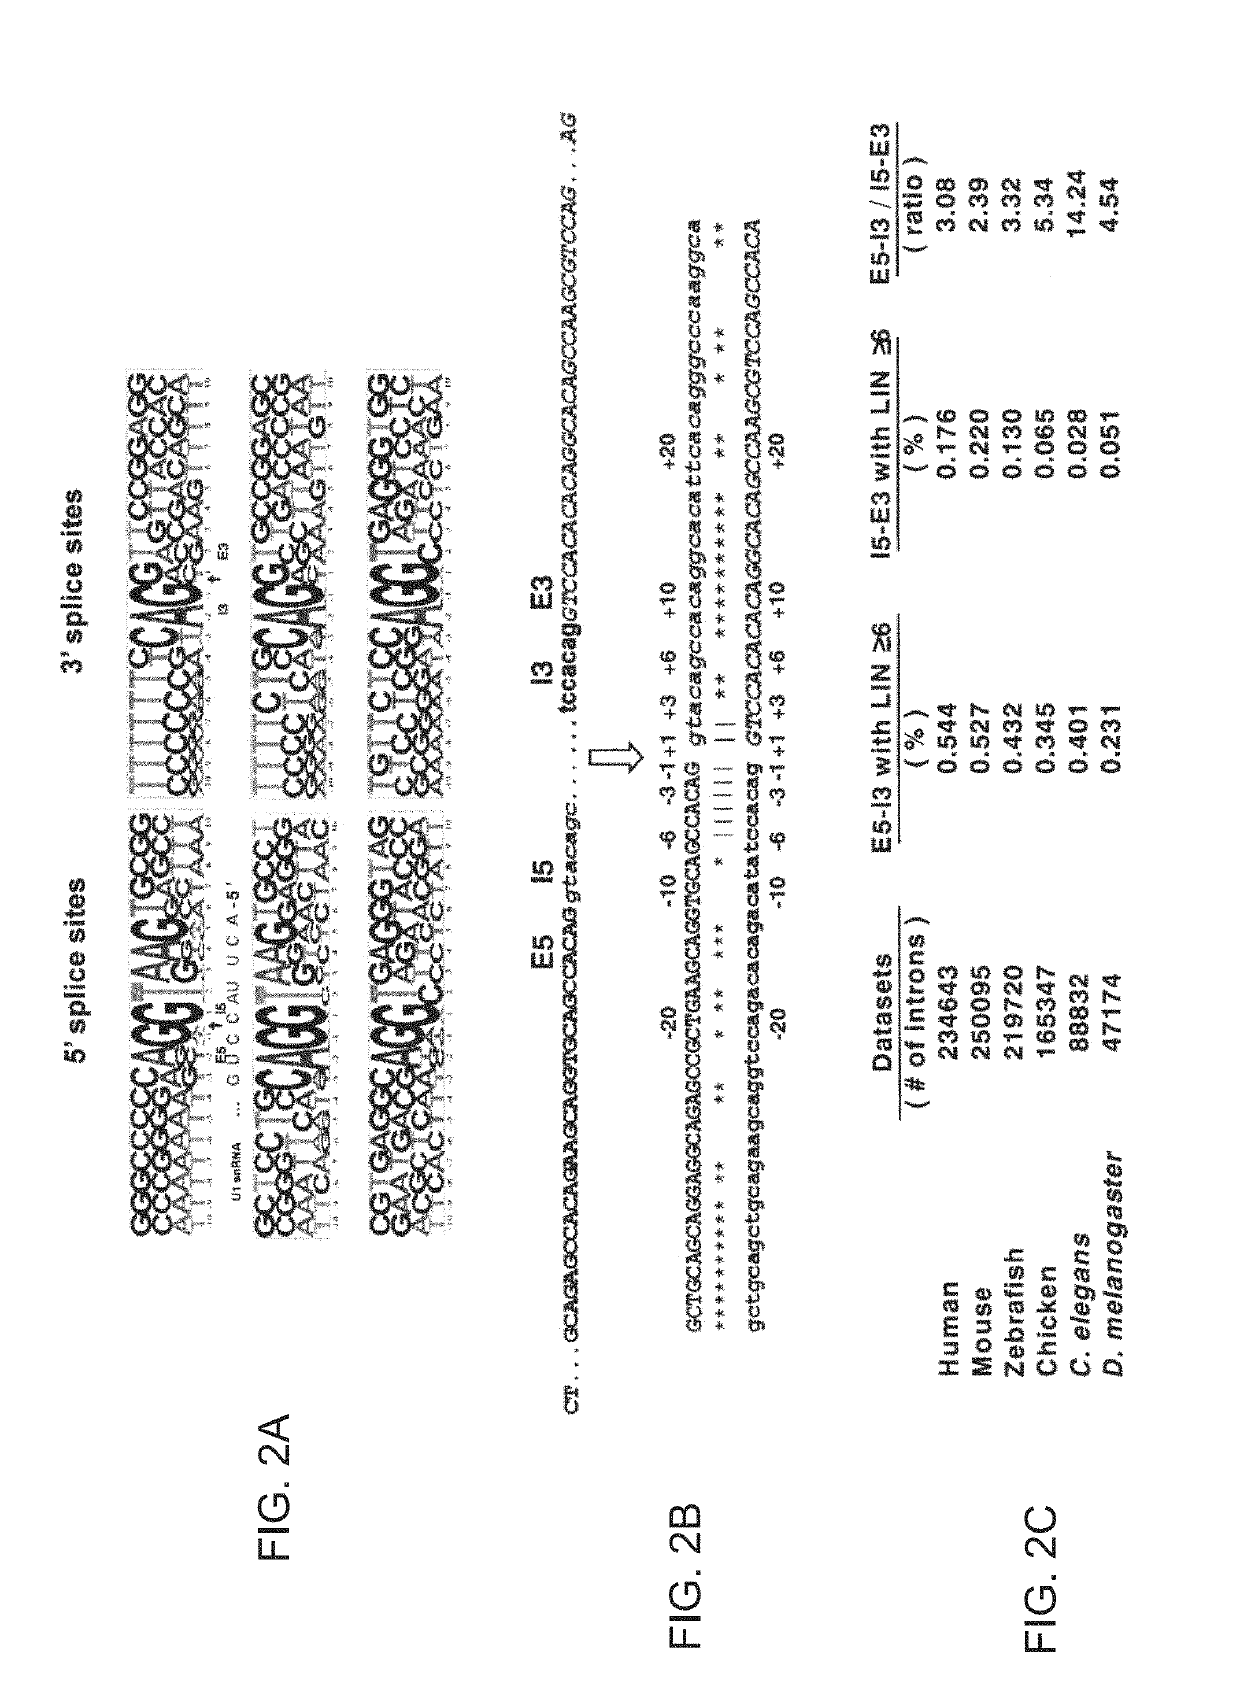 System and method for analyzing splicing codes of spliceosomal introns